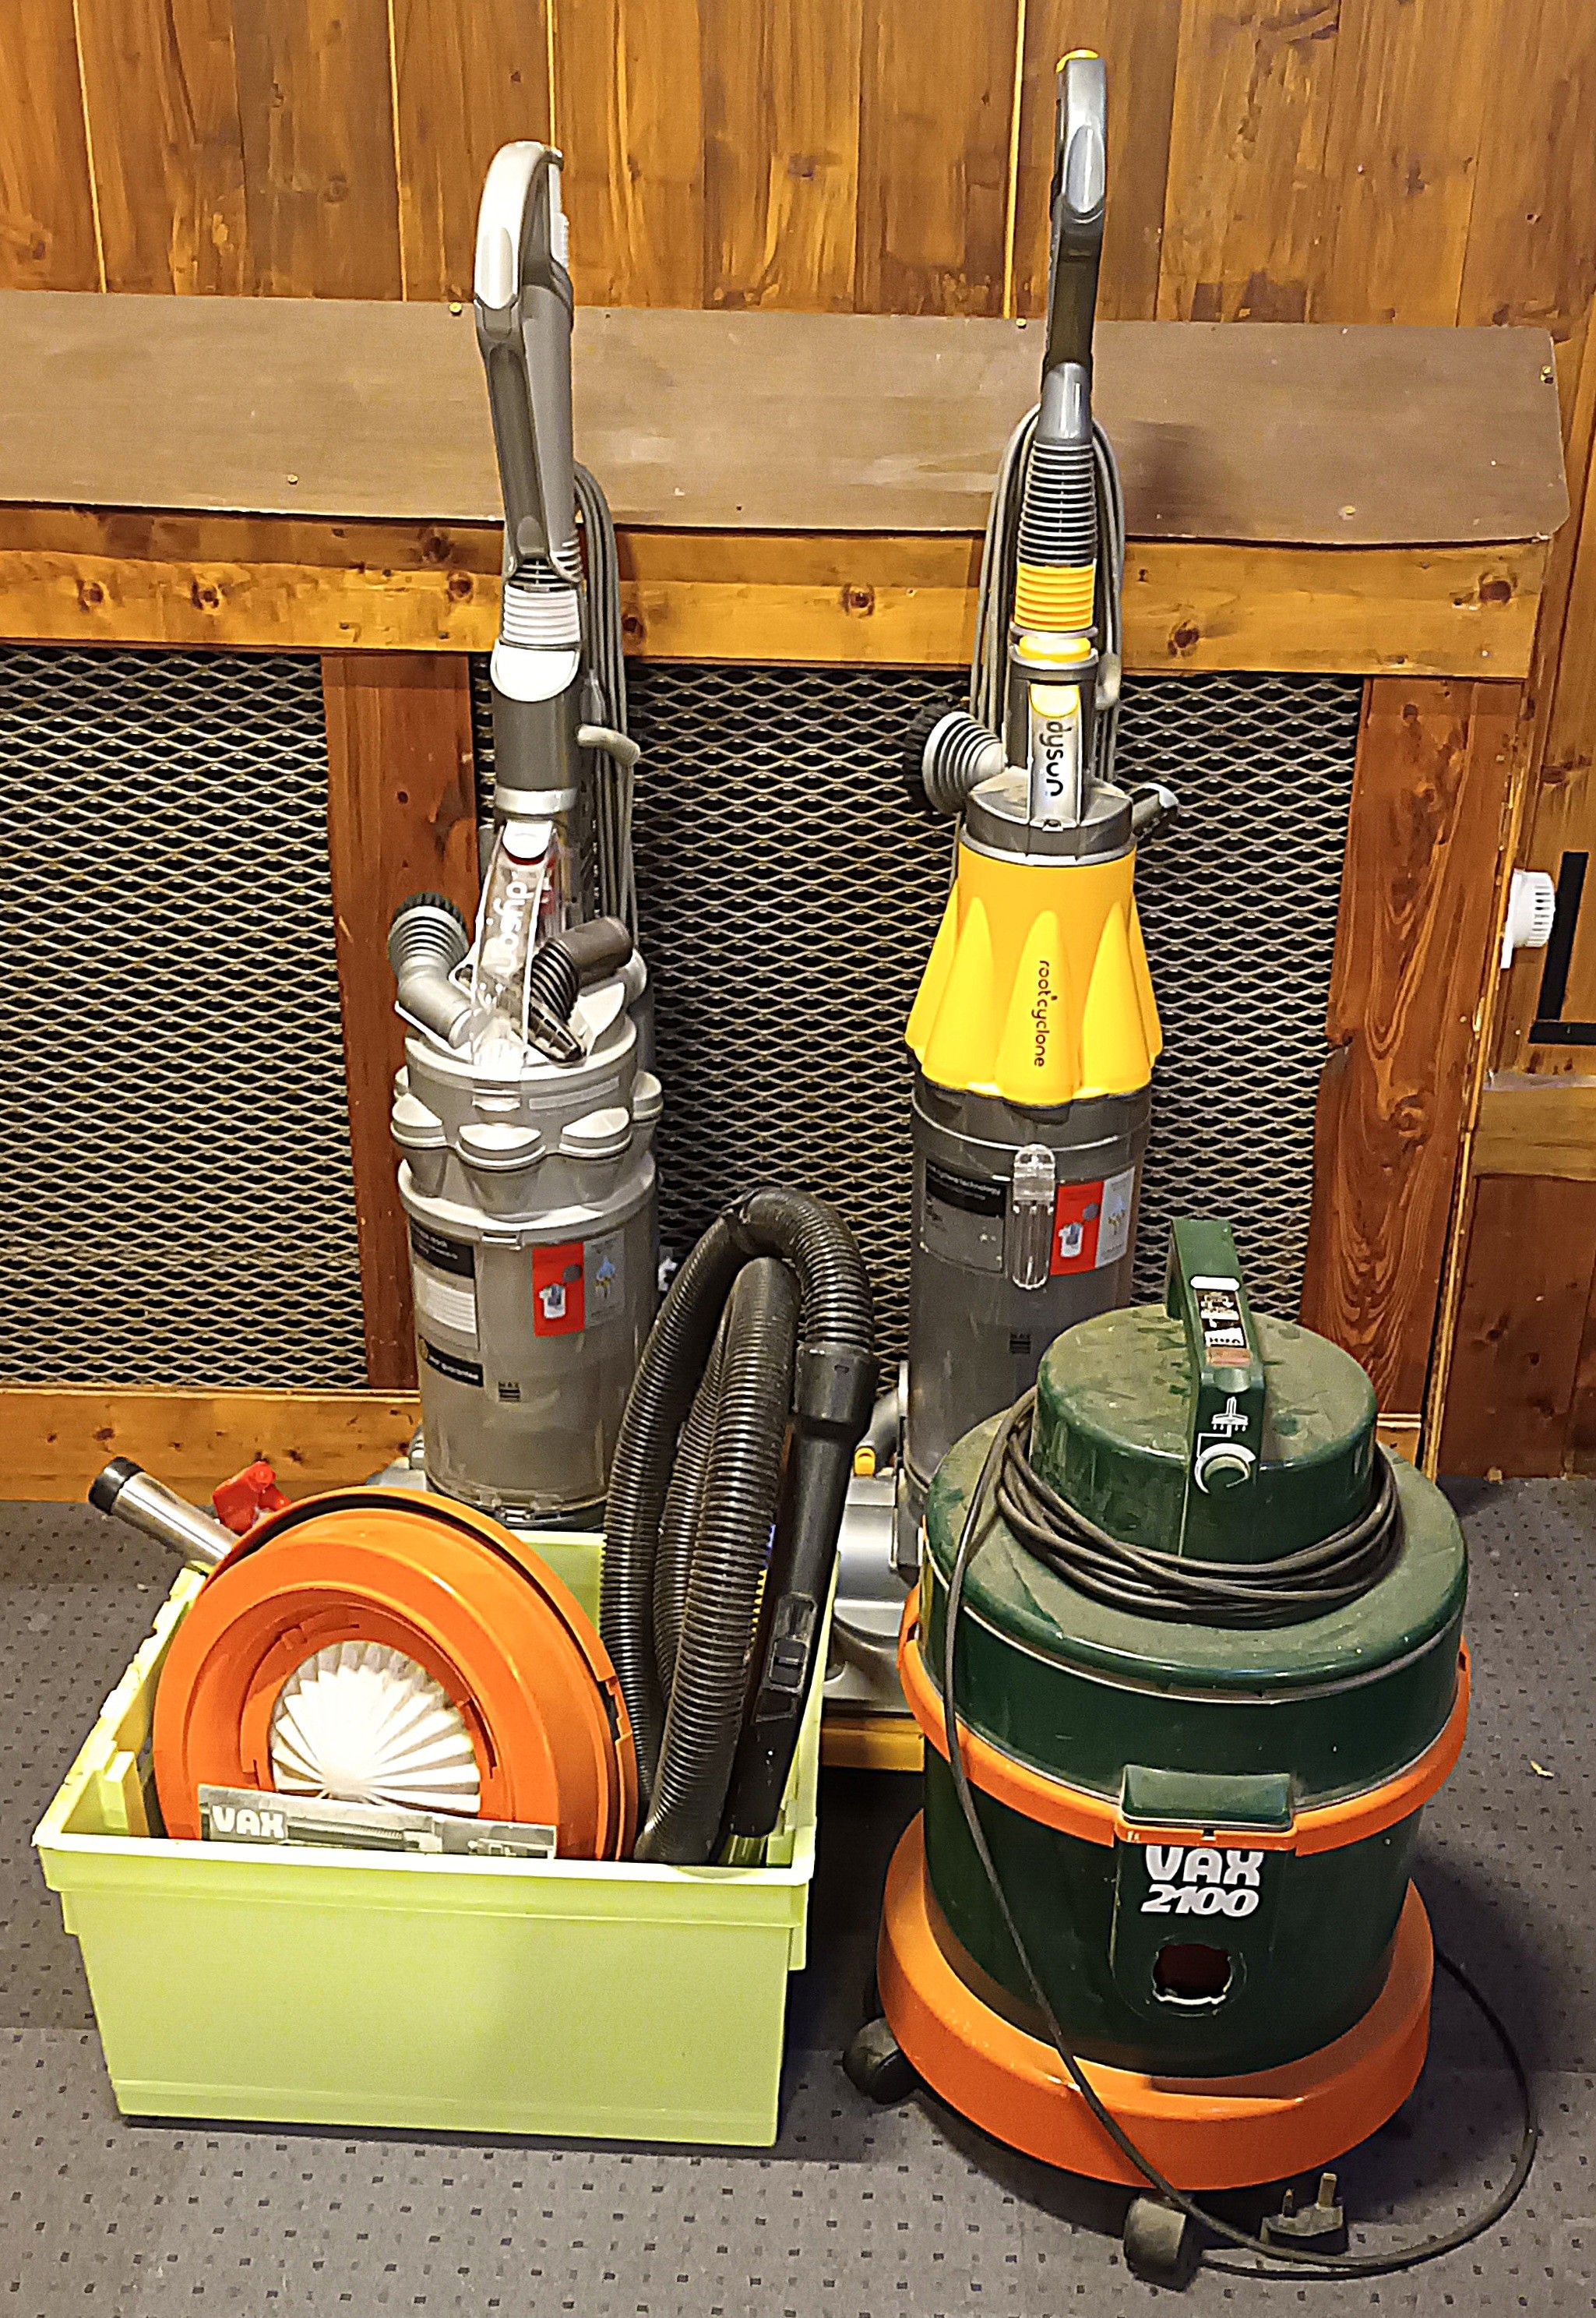 A Dyson DC14 upright vacuum cleaner, together with a Dyson DC07, and a Vax 2100 cleaner with